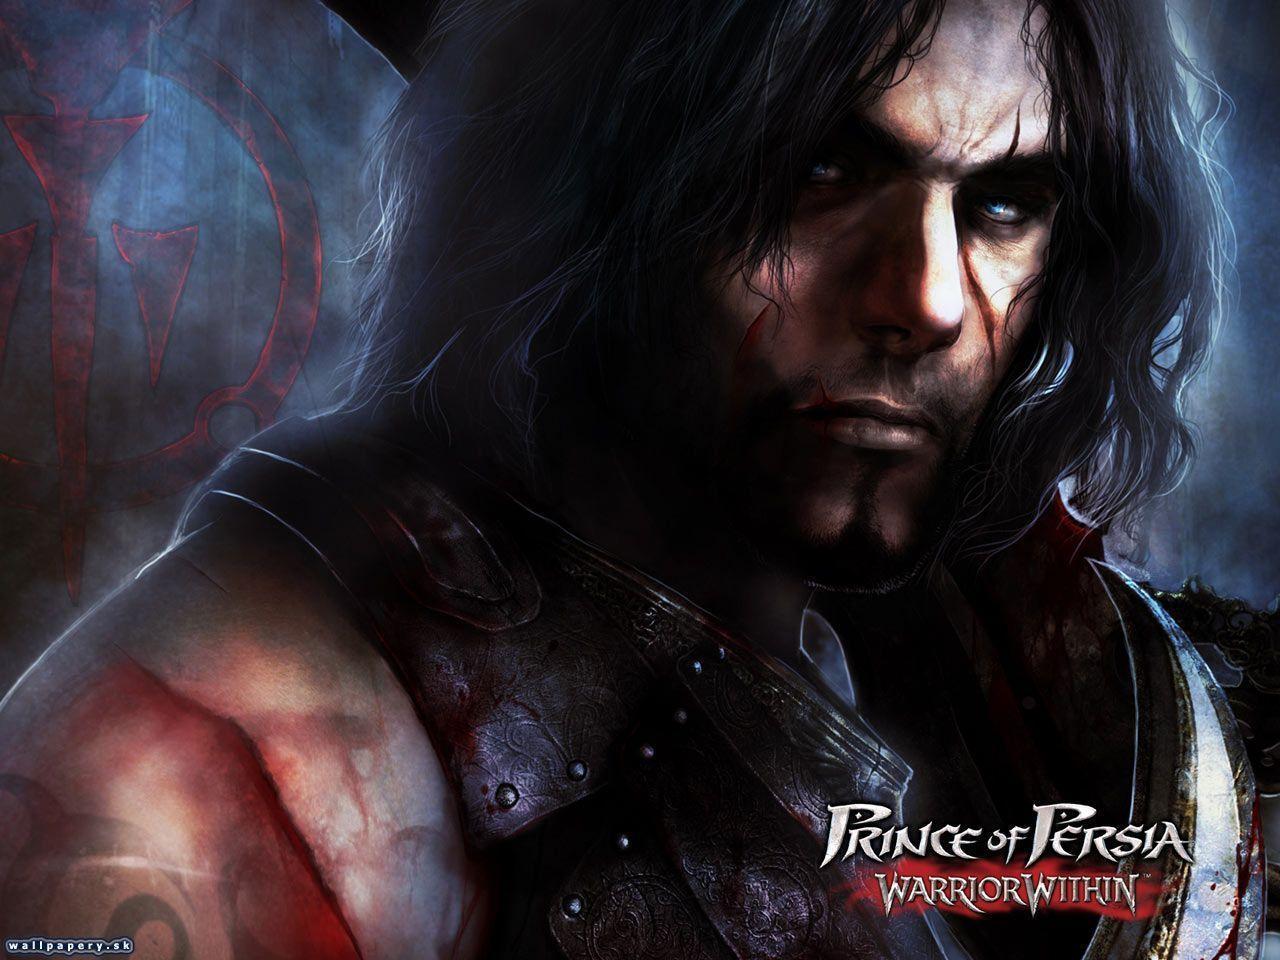 Prince Of Persia Warrior Within Wallpaper Abcgamescz 1280x960PX